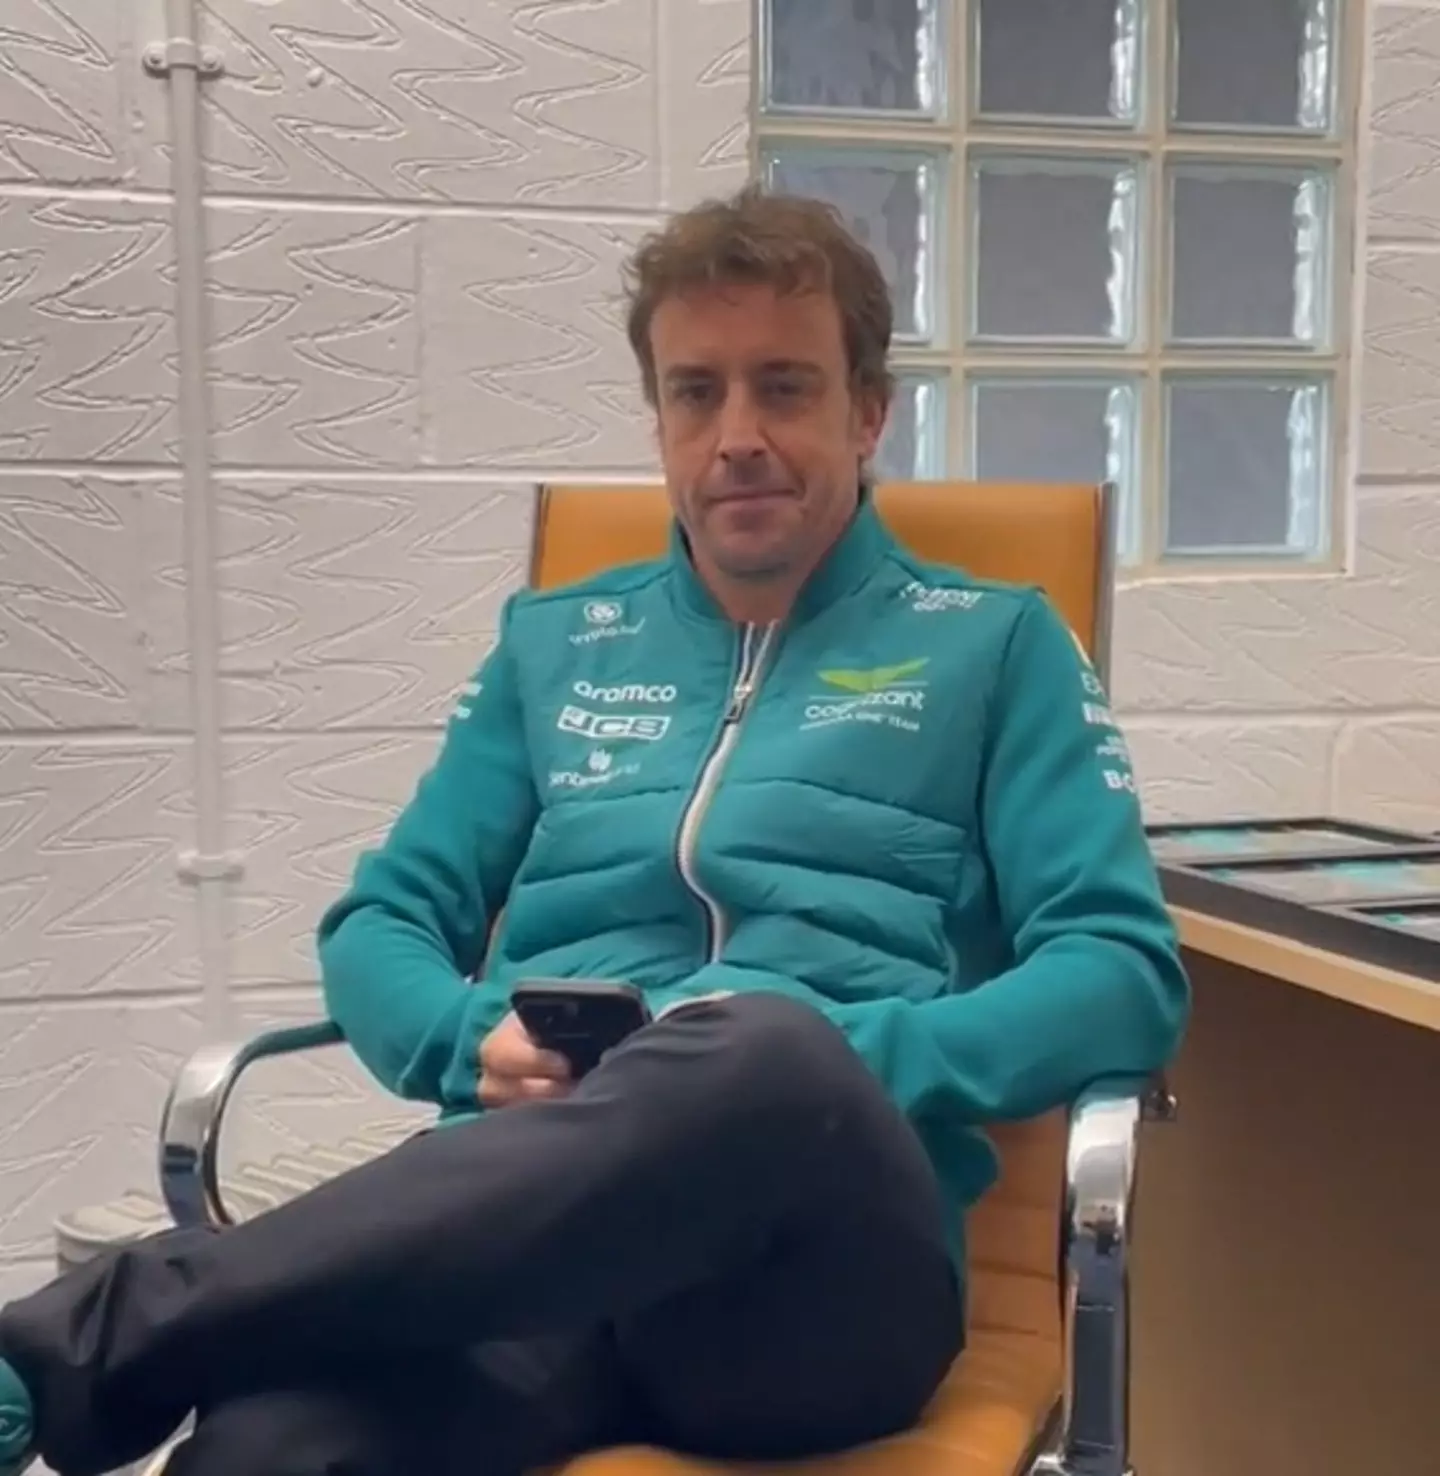 Alonso simply posted a video of him winking to let you know he knows that you know.